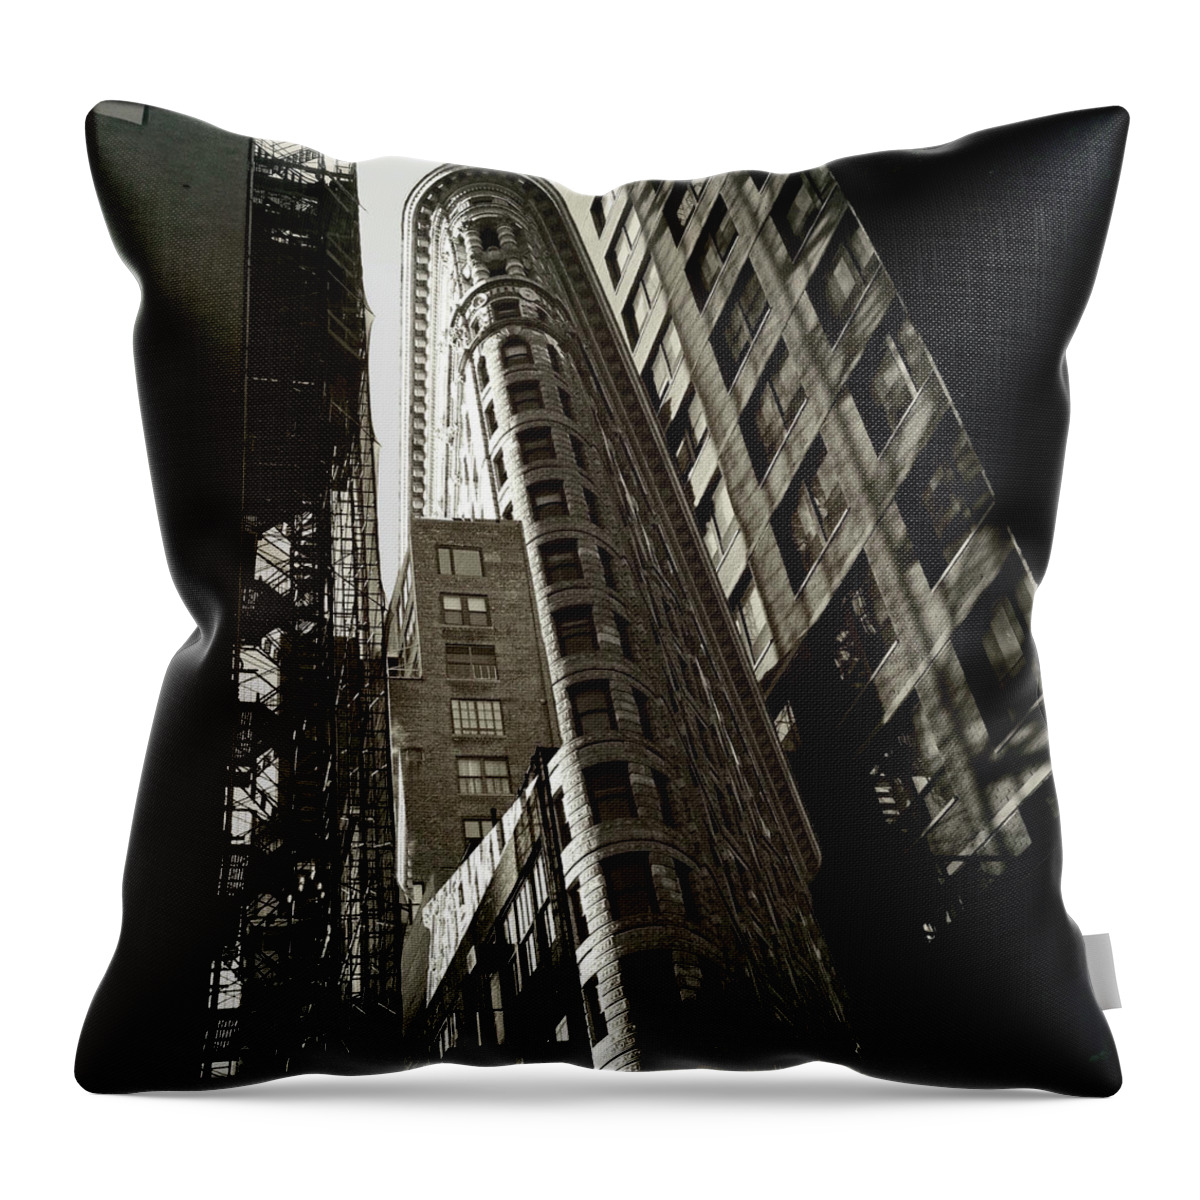 ‘flatiron Building’ Throw Pillow featuring the photograph Flatiron Building With A Twist by Carol Whaley Addassi